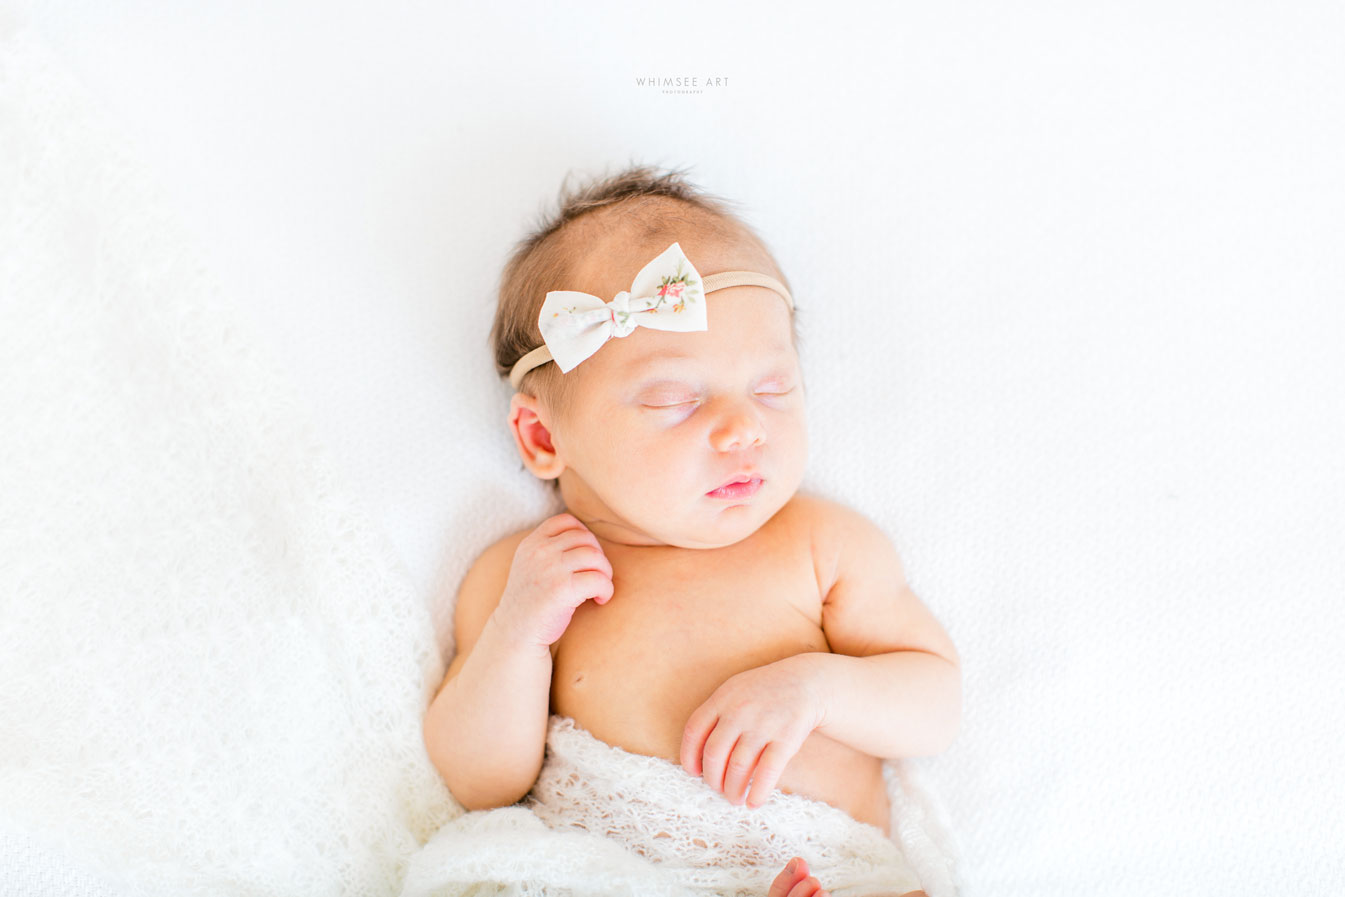 Olivia's Bright and Simple Newborn Portraits | Light and Airy Newborn Photography | Whimsee Art Photography